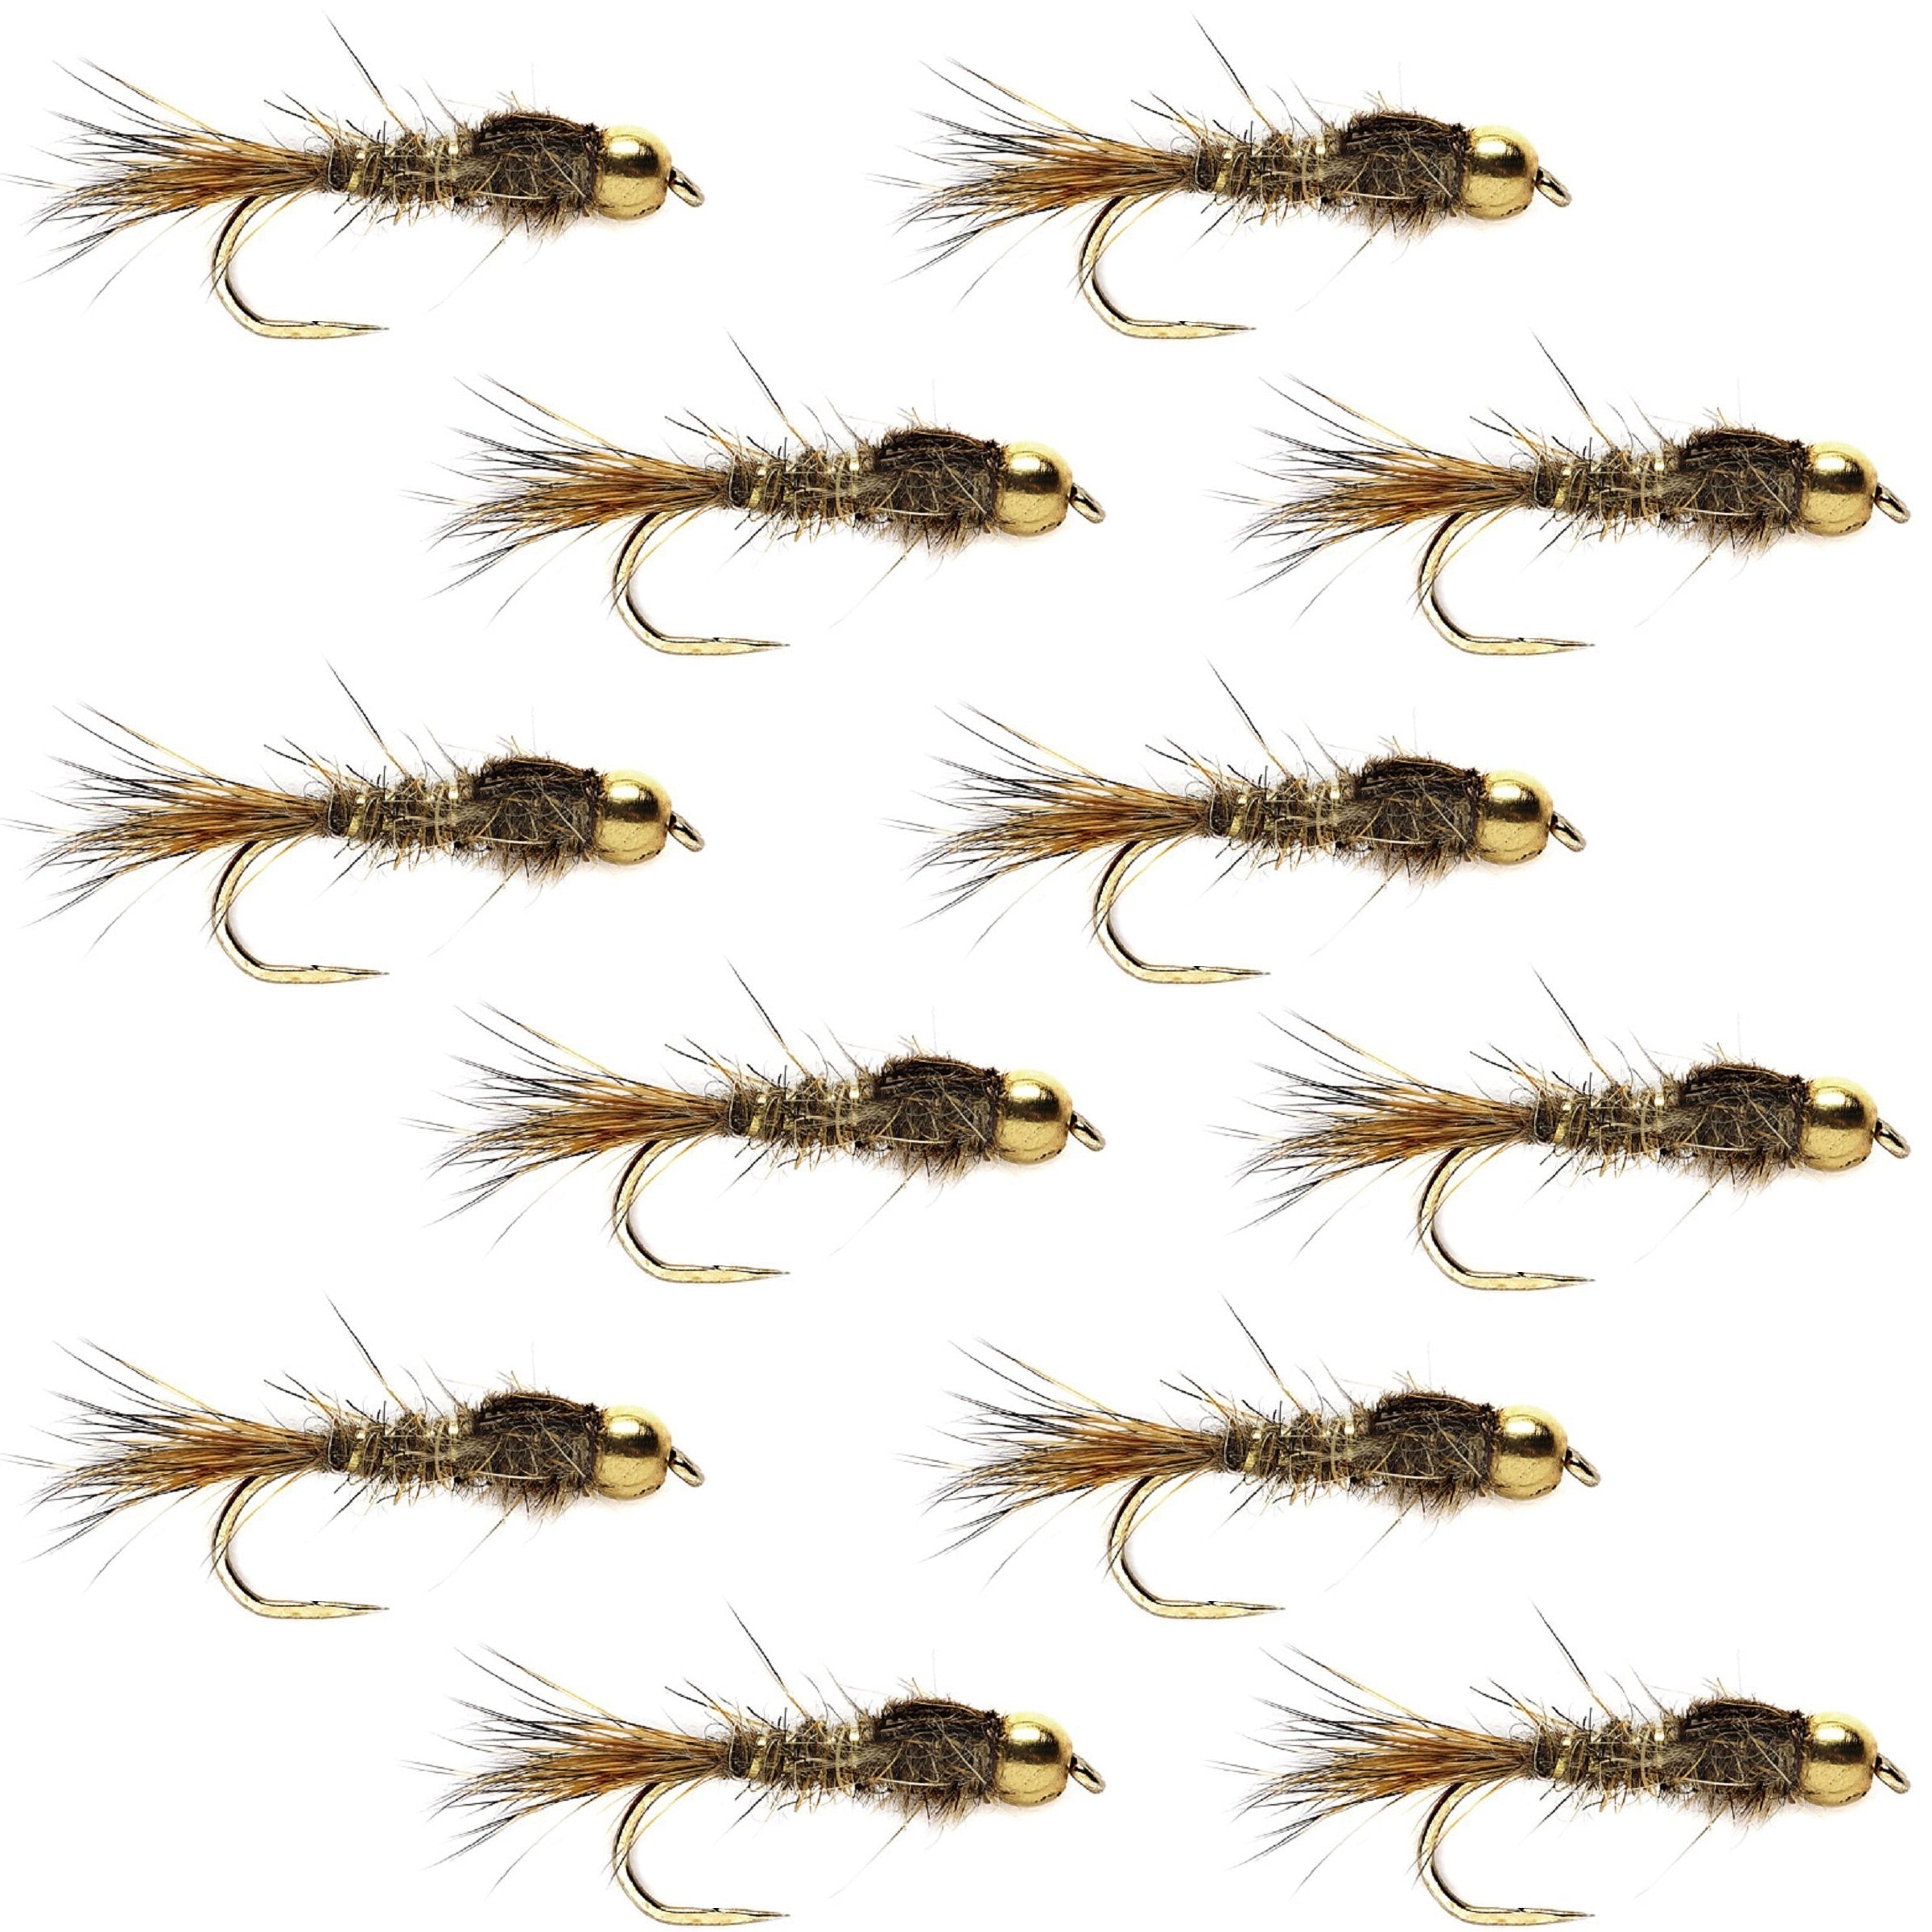 Barbless Bead Head Gold Ribbed Hare's Ear Nymph 1 Dozen Flies Hook Size 12